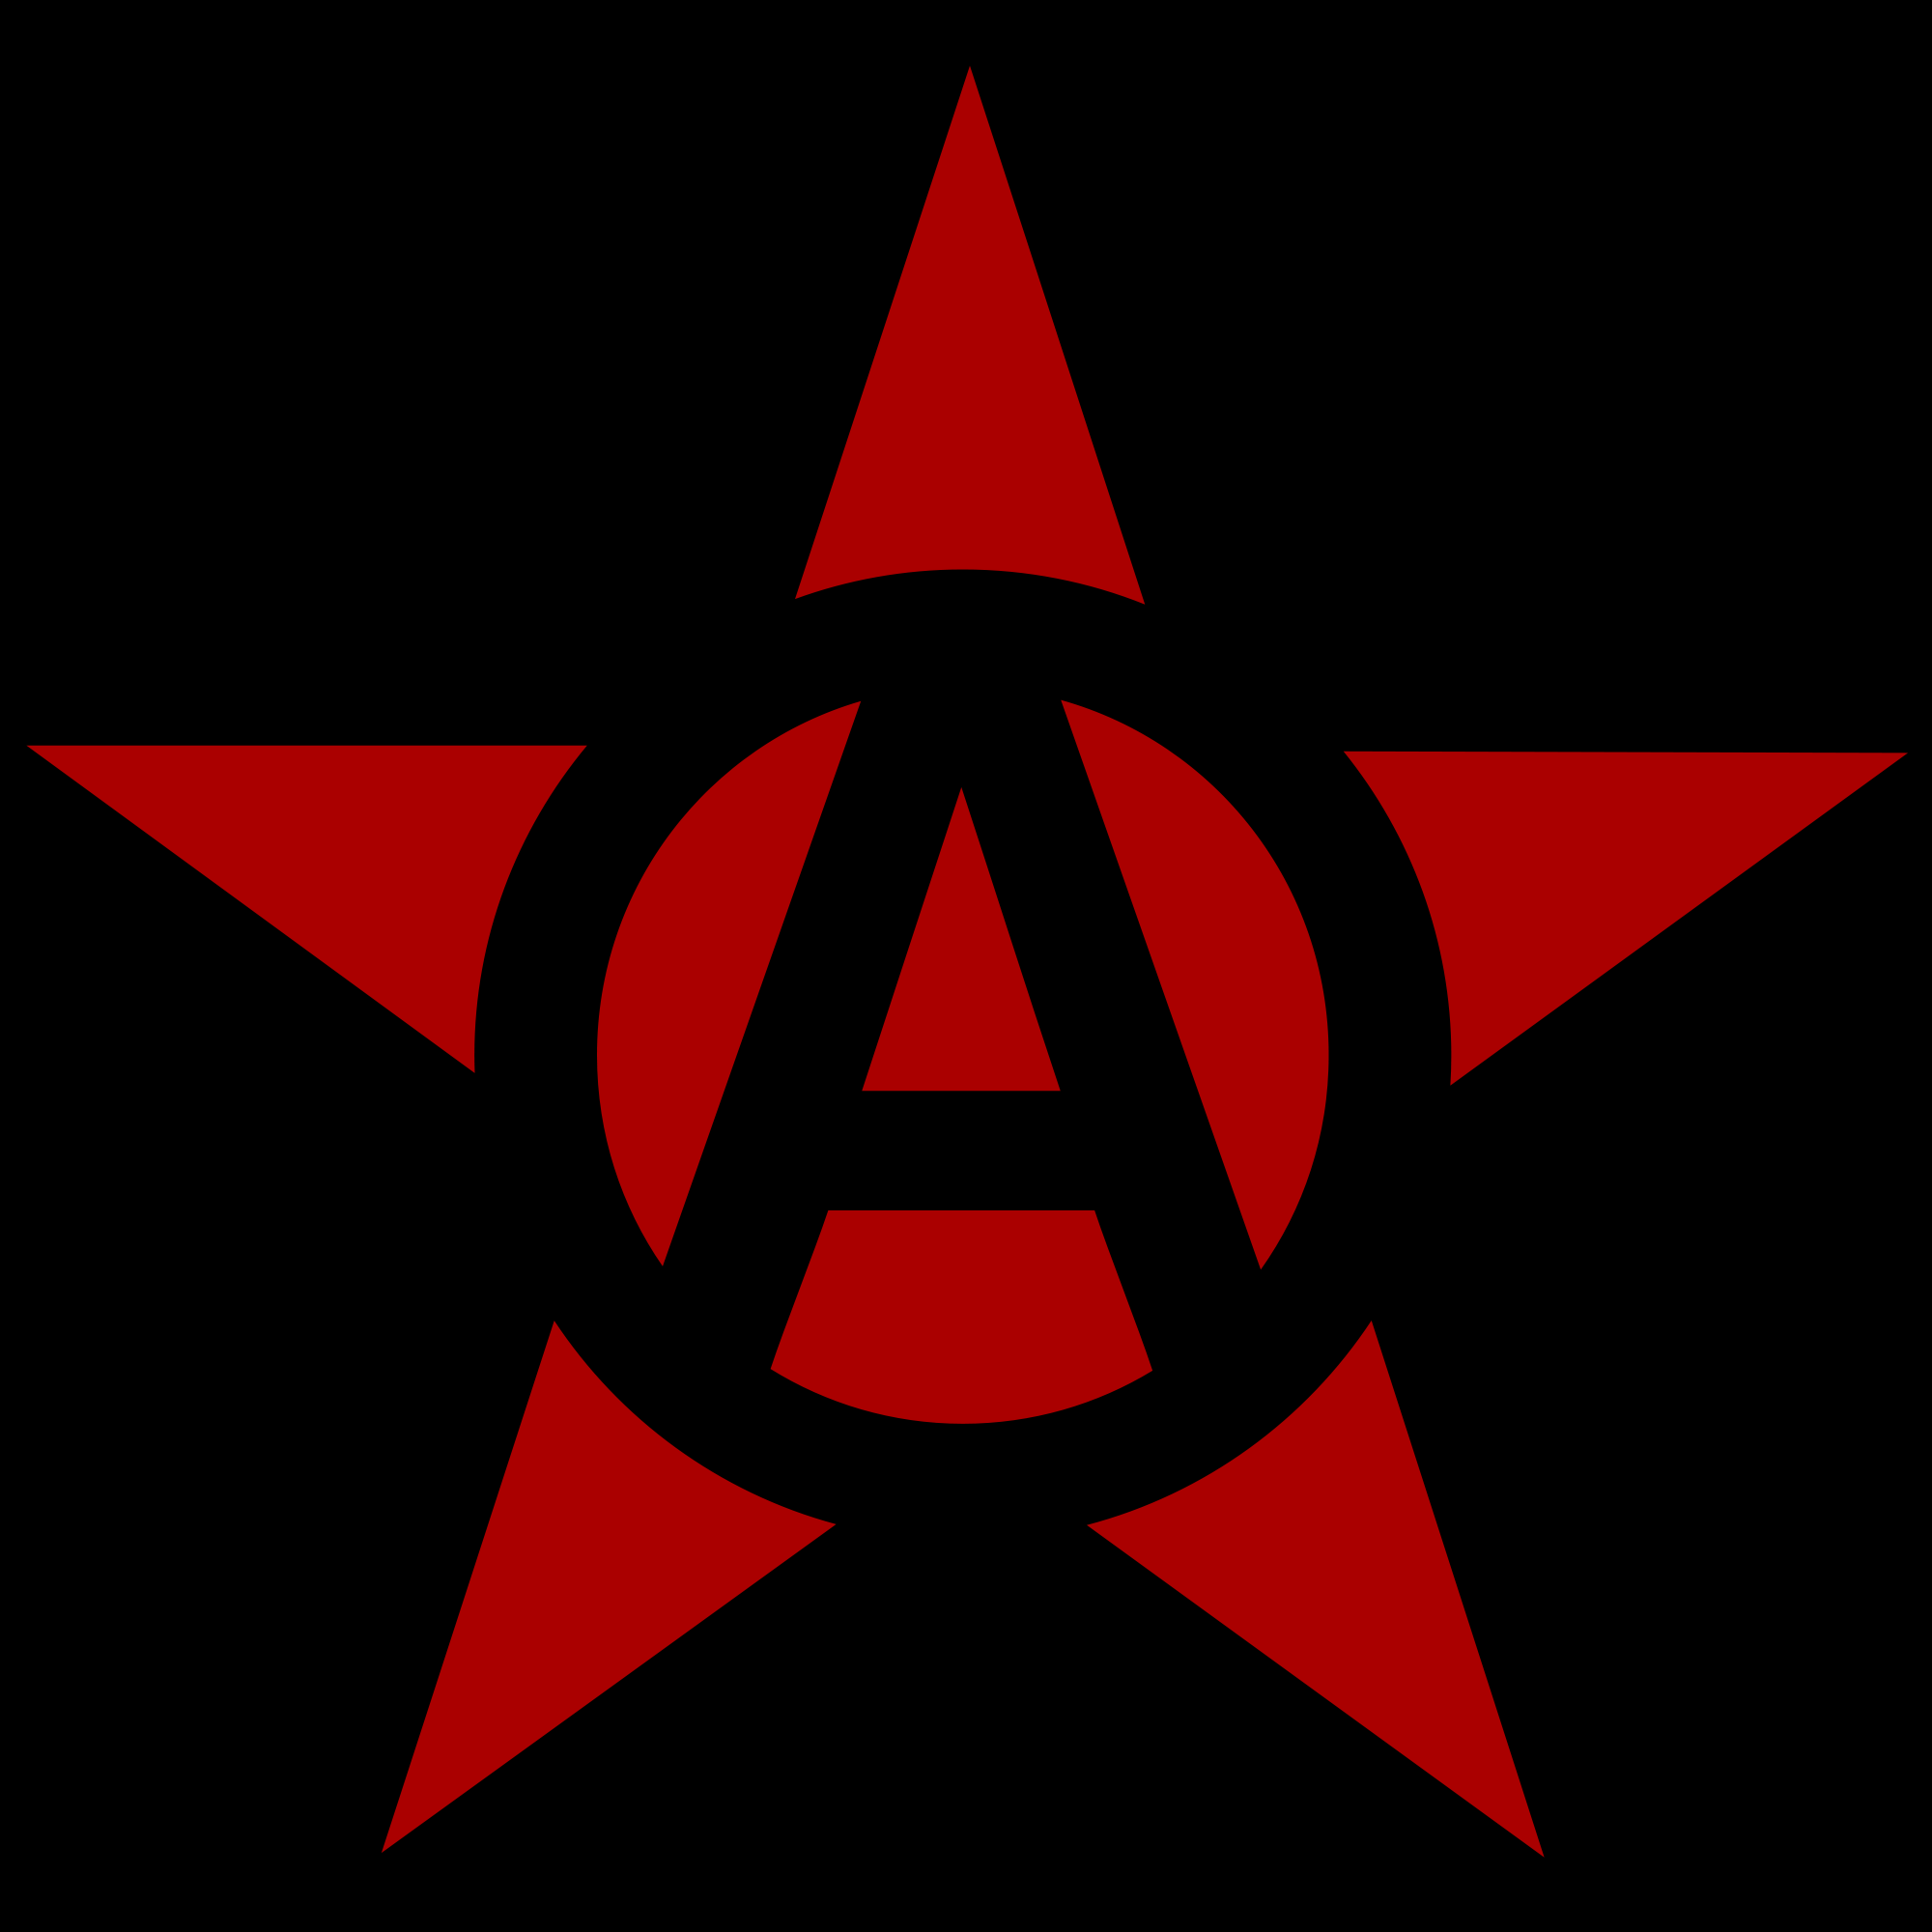 Red Star Circle Logo - File:Circle-A red star.svg - Wikimedia Commons